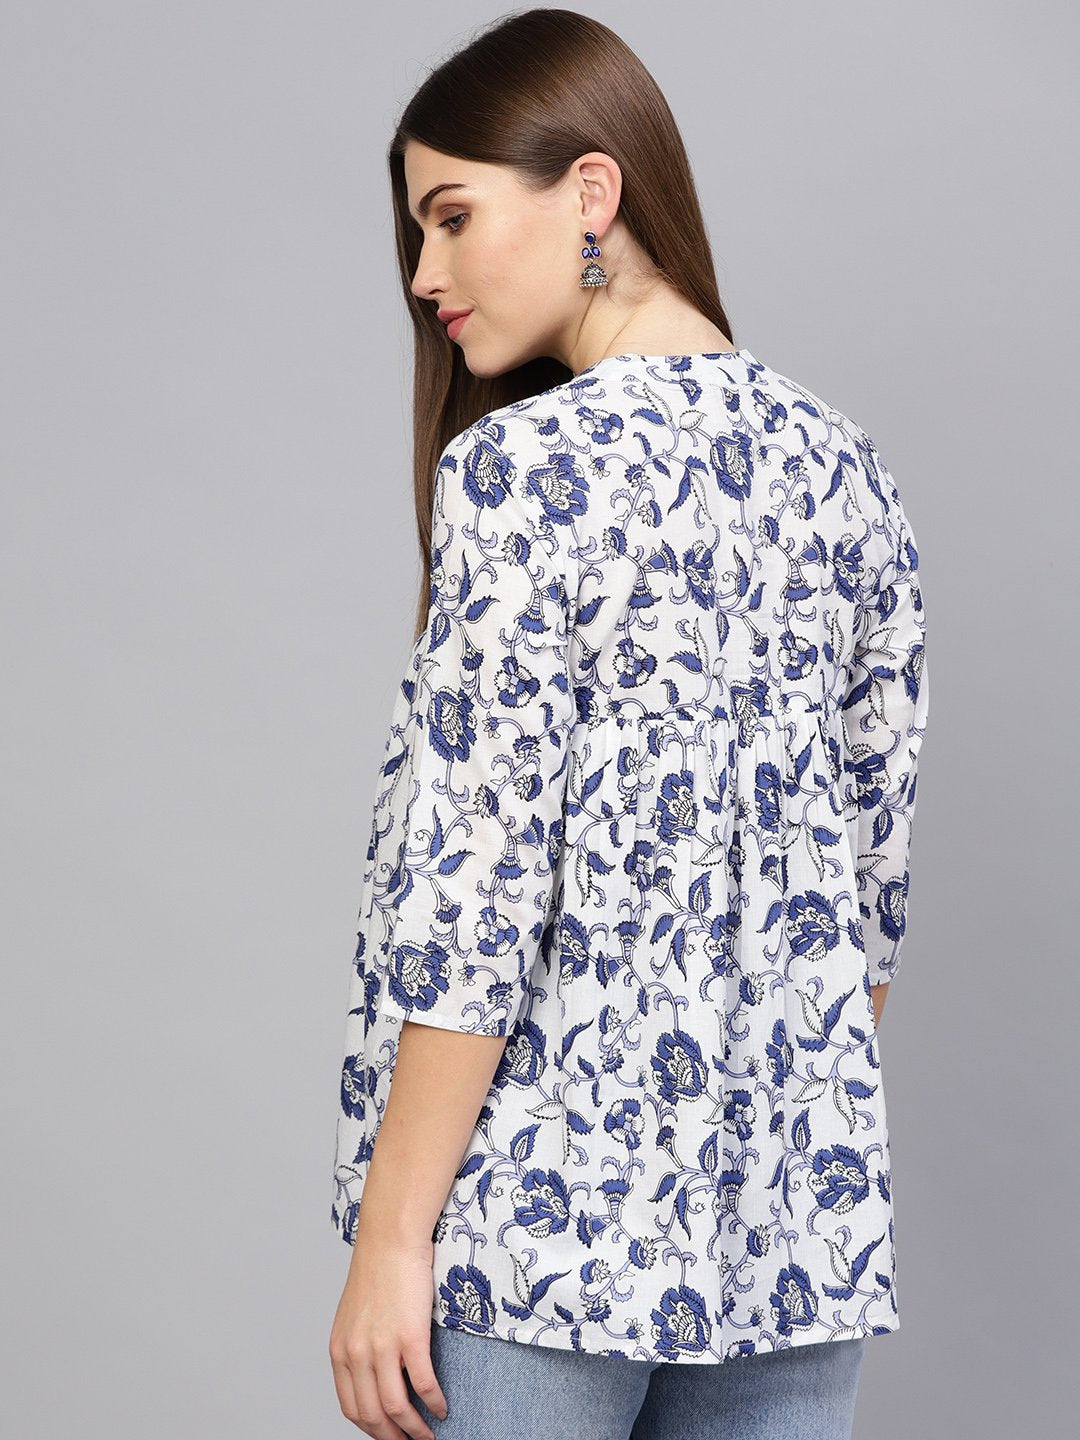 Women's Off-White & Blue Printed A-Line Tunic - Nayo Clothing